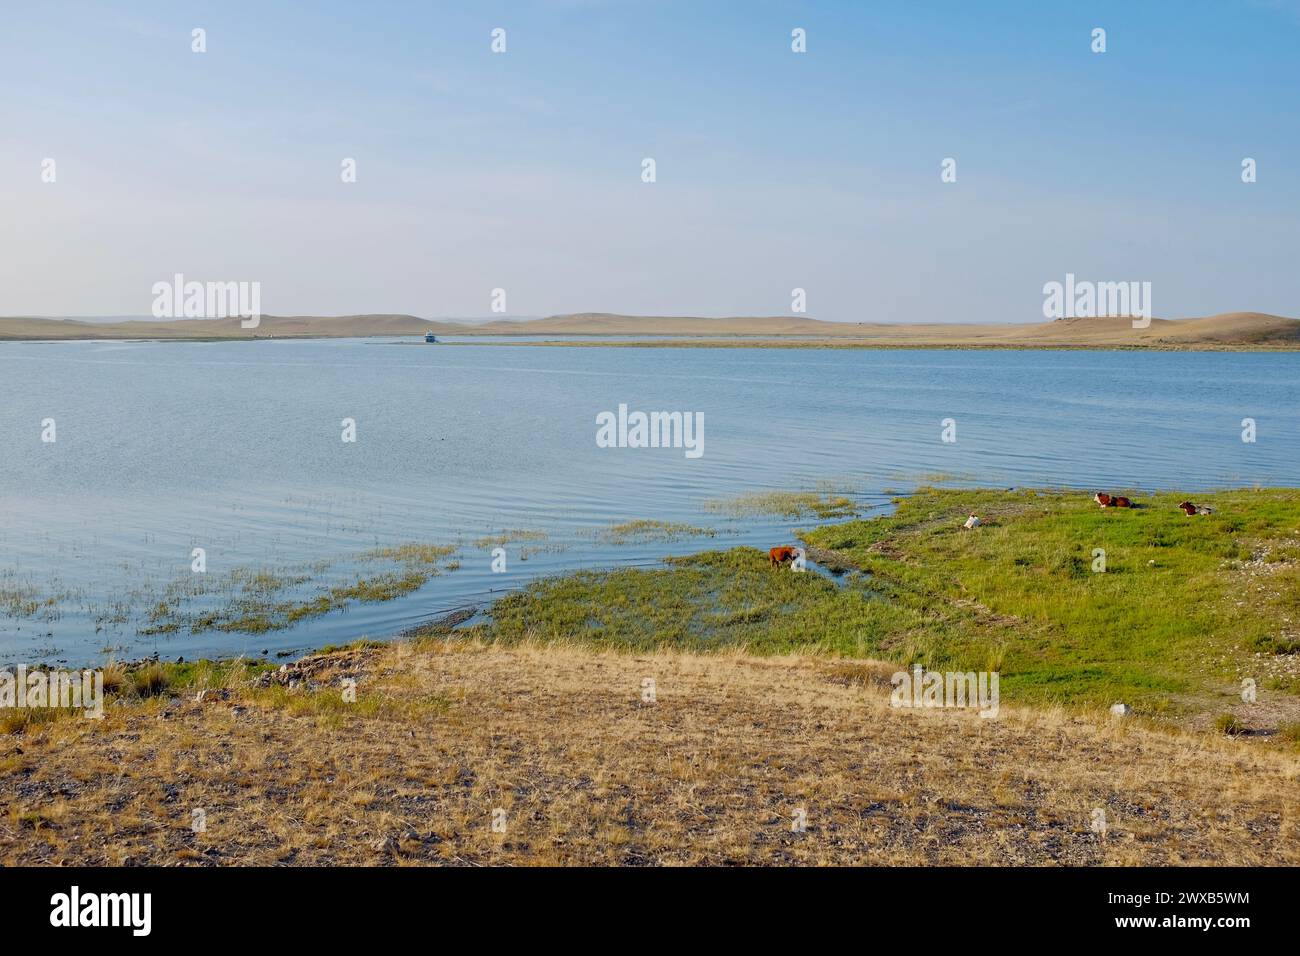 Open country field in Inner Mongolia, China. Stock Photo